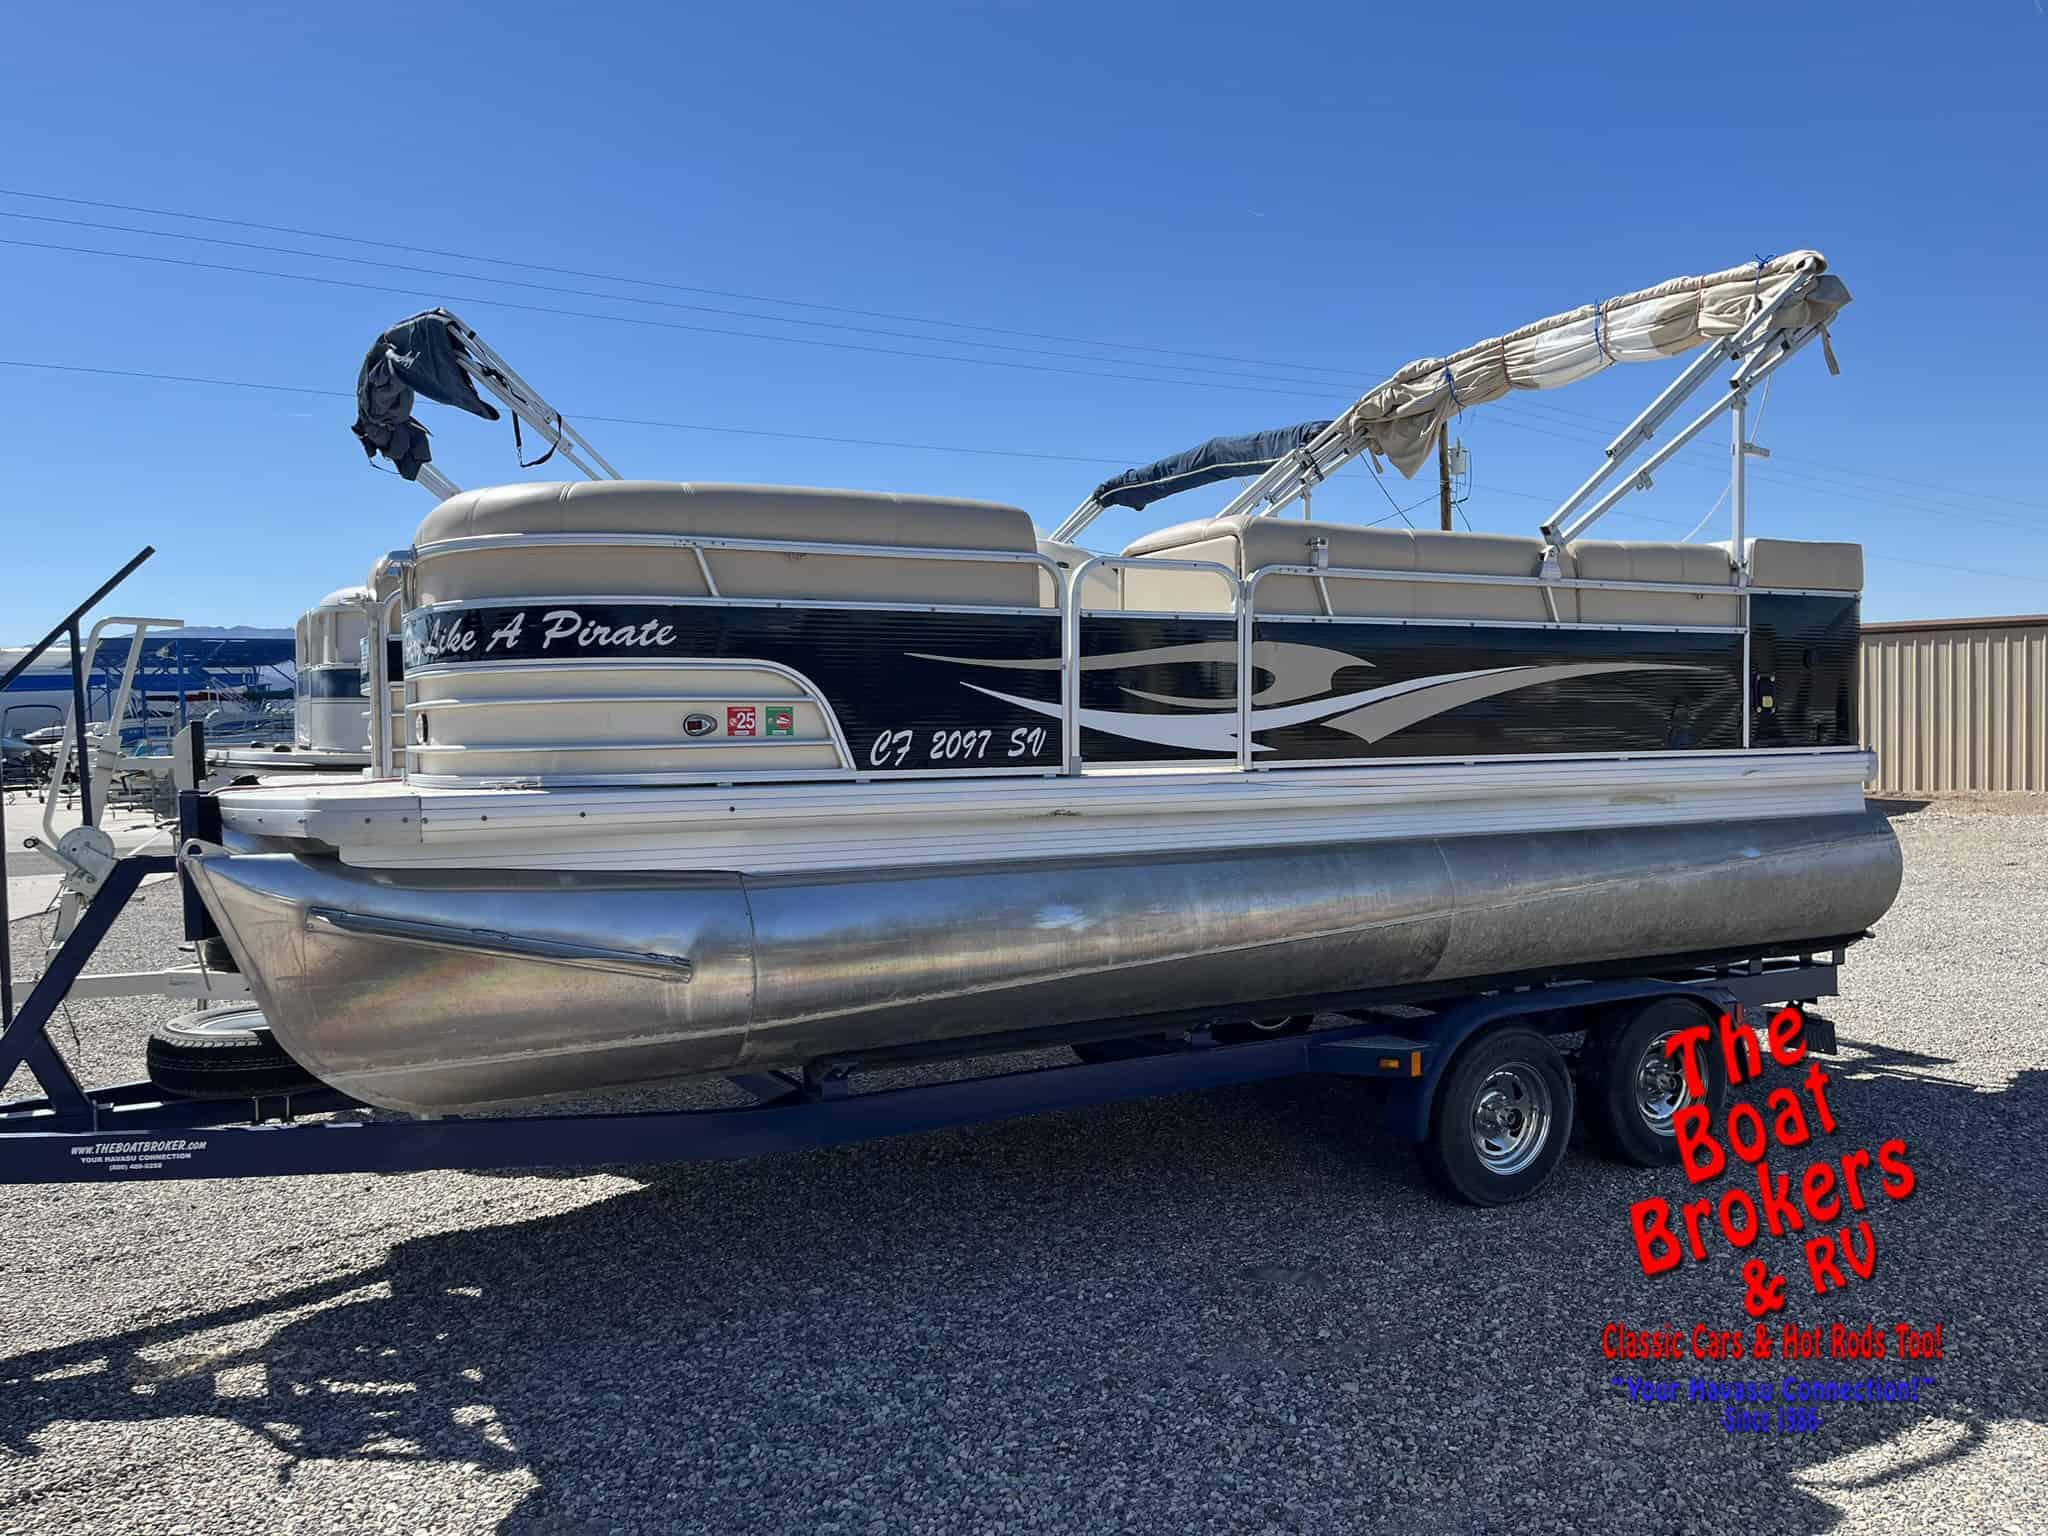 Pontoon Boats for sale in Liberty Center, Indiana, Facebook Marketplace